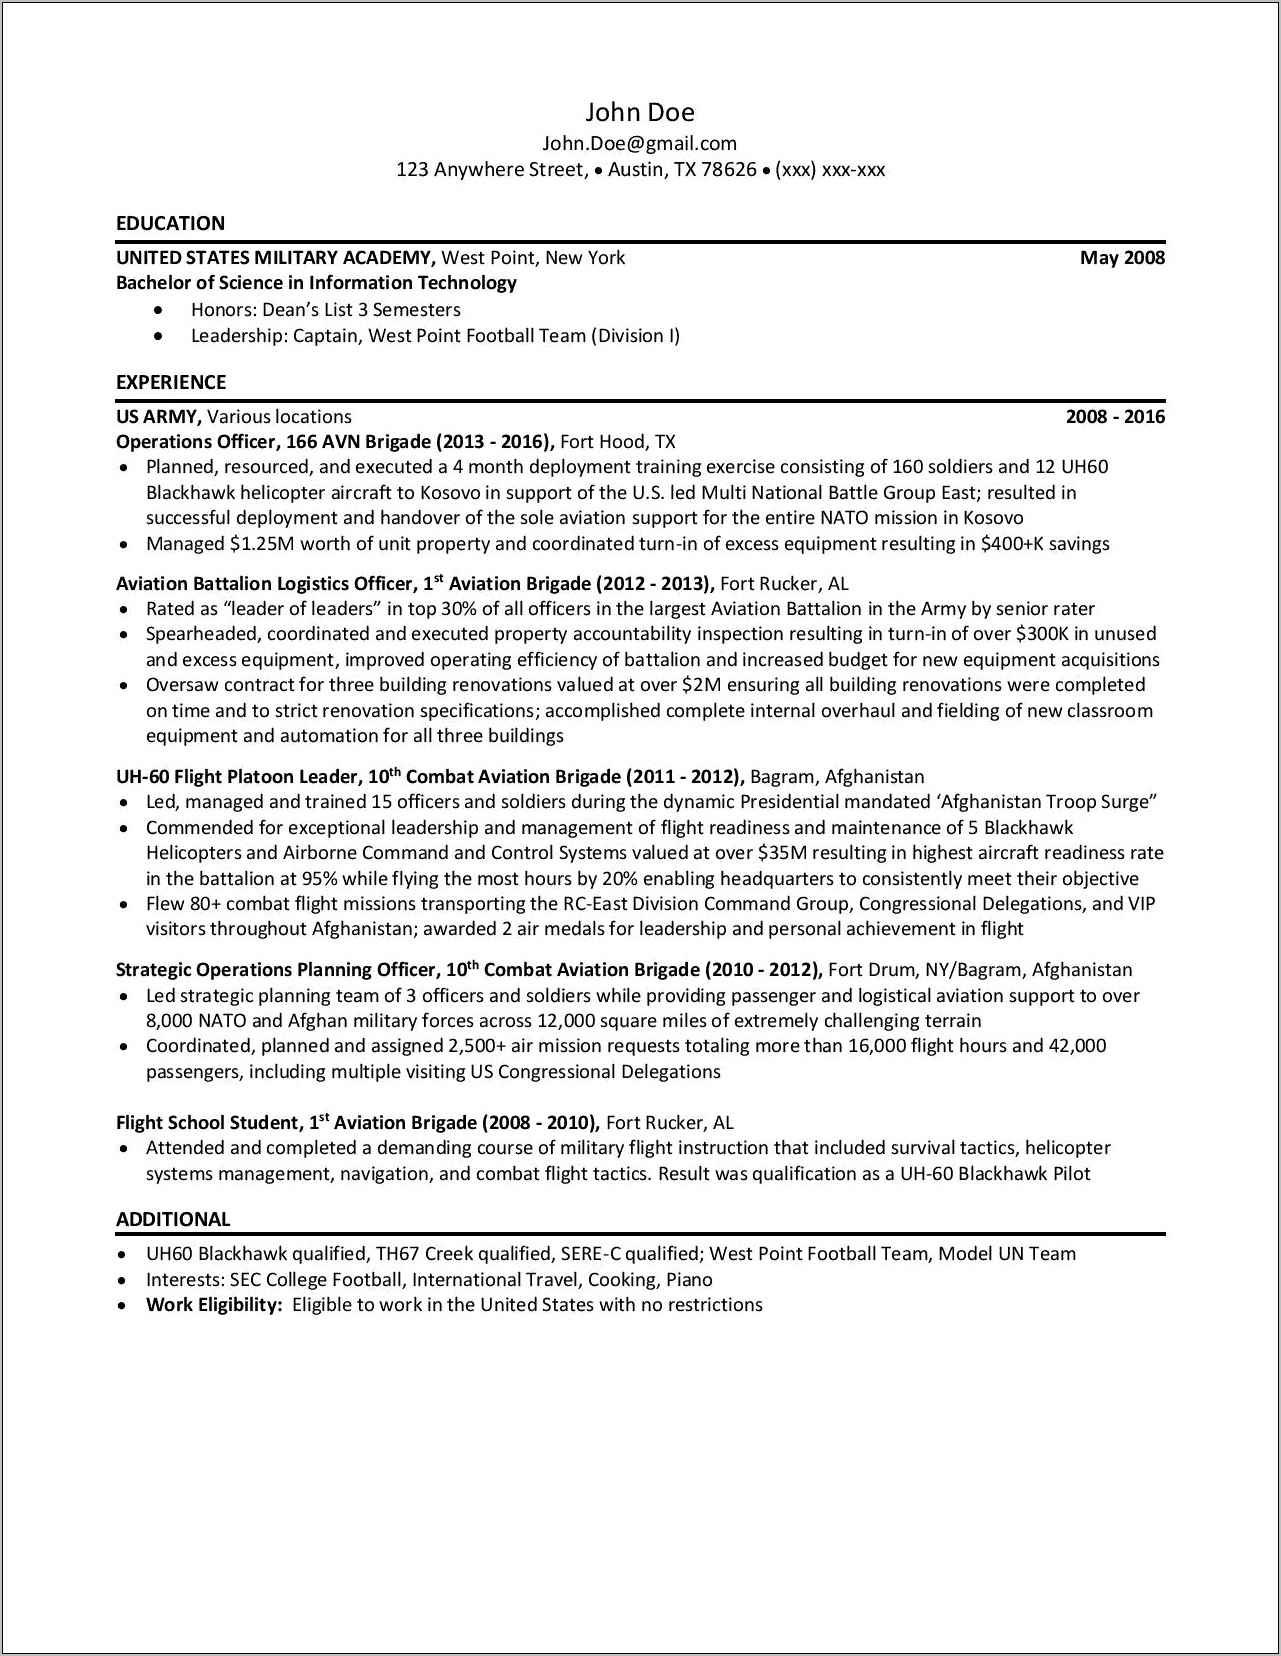 Resume Objective For Military To Civilian